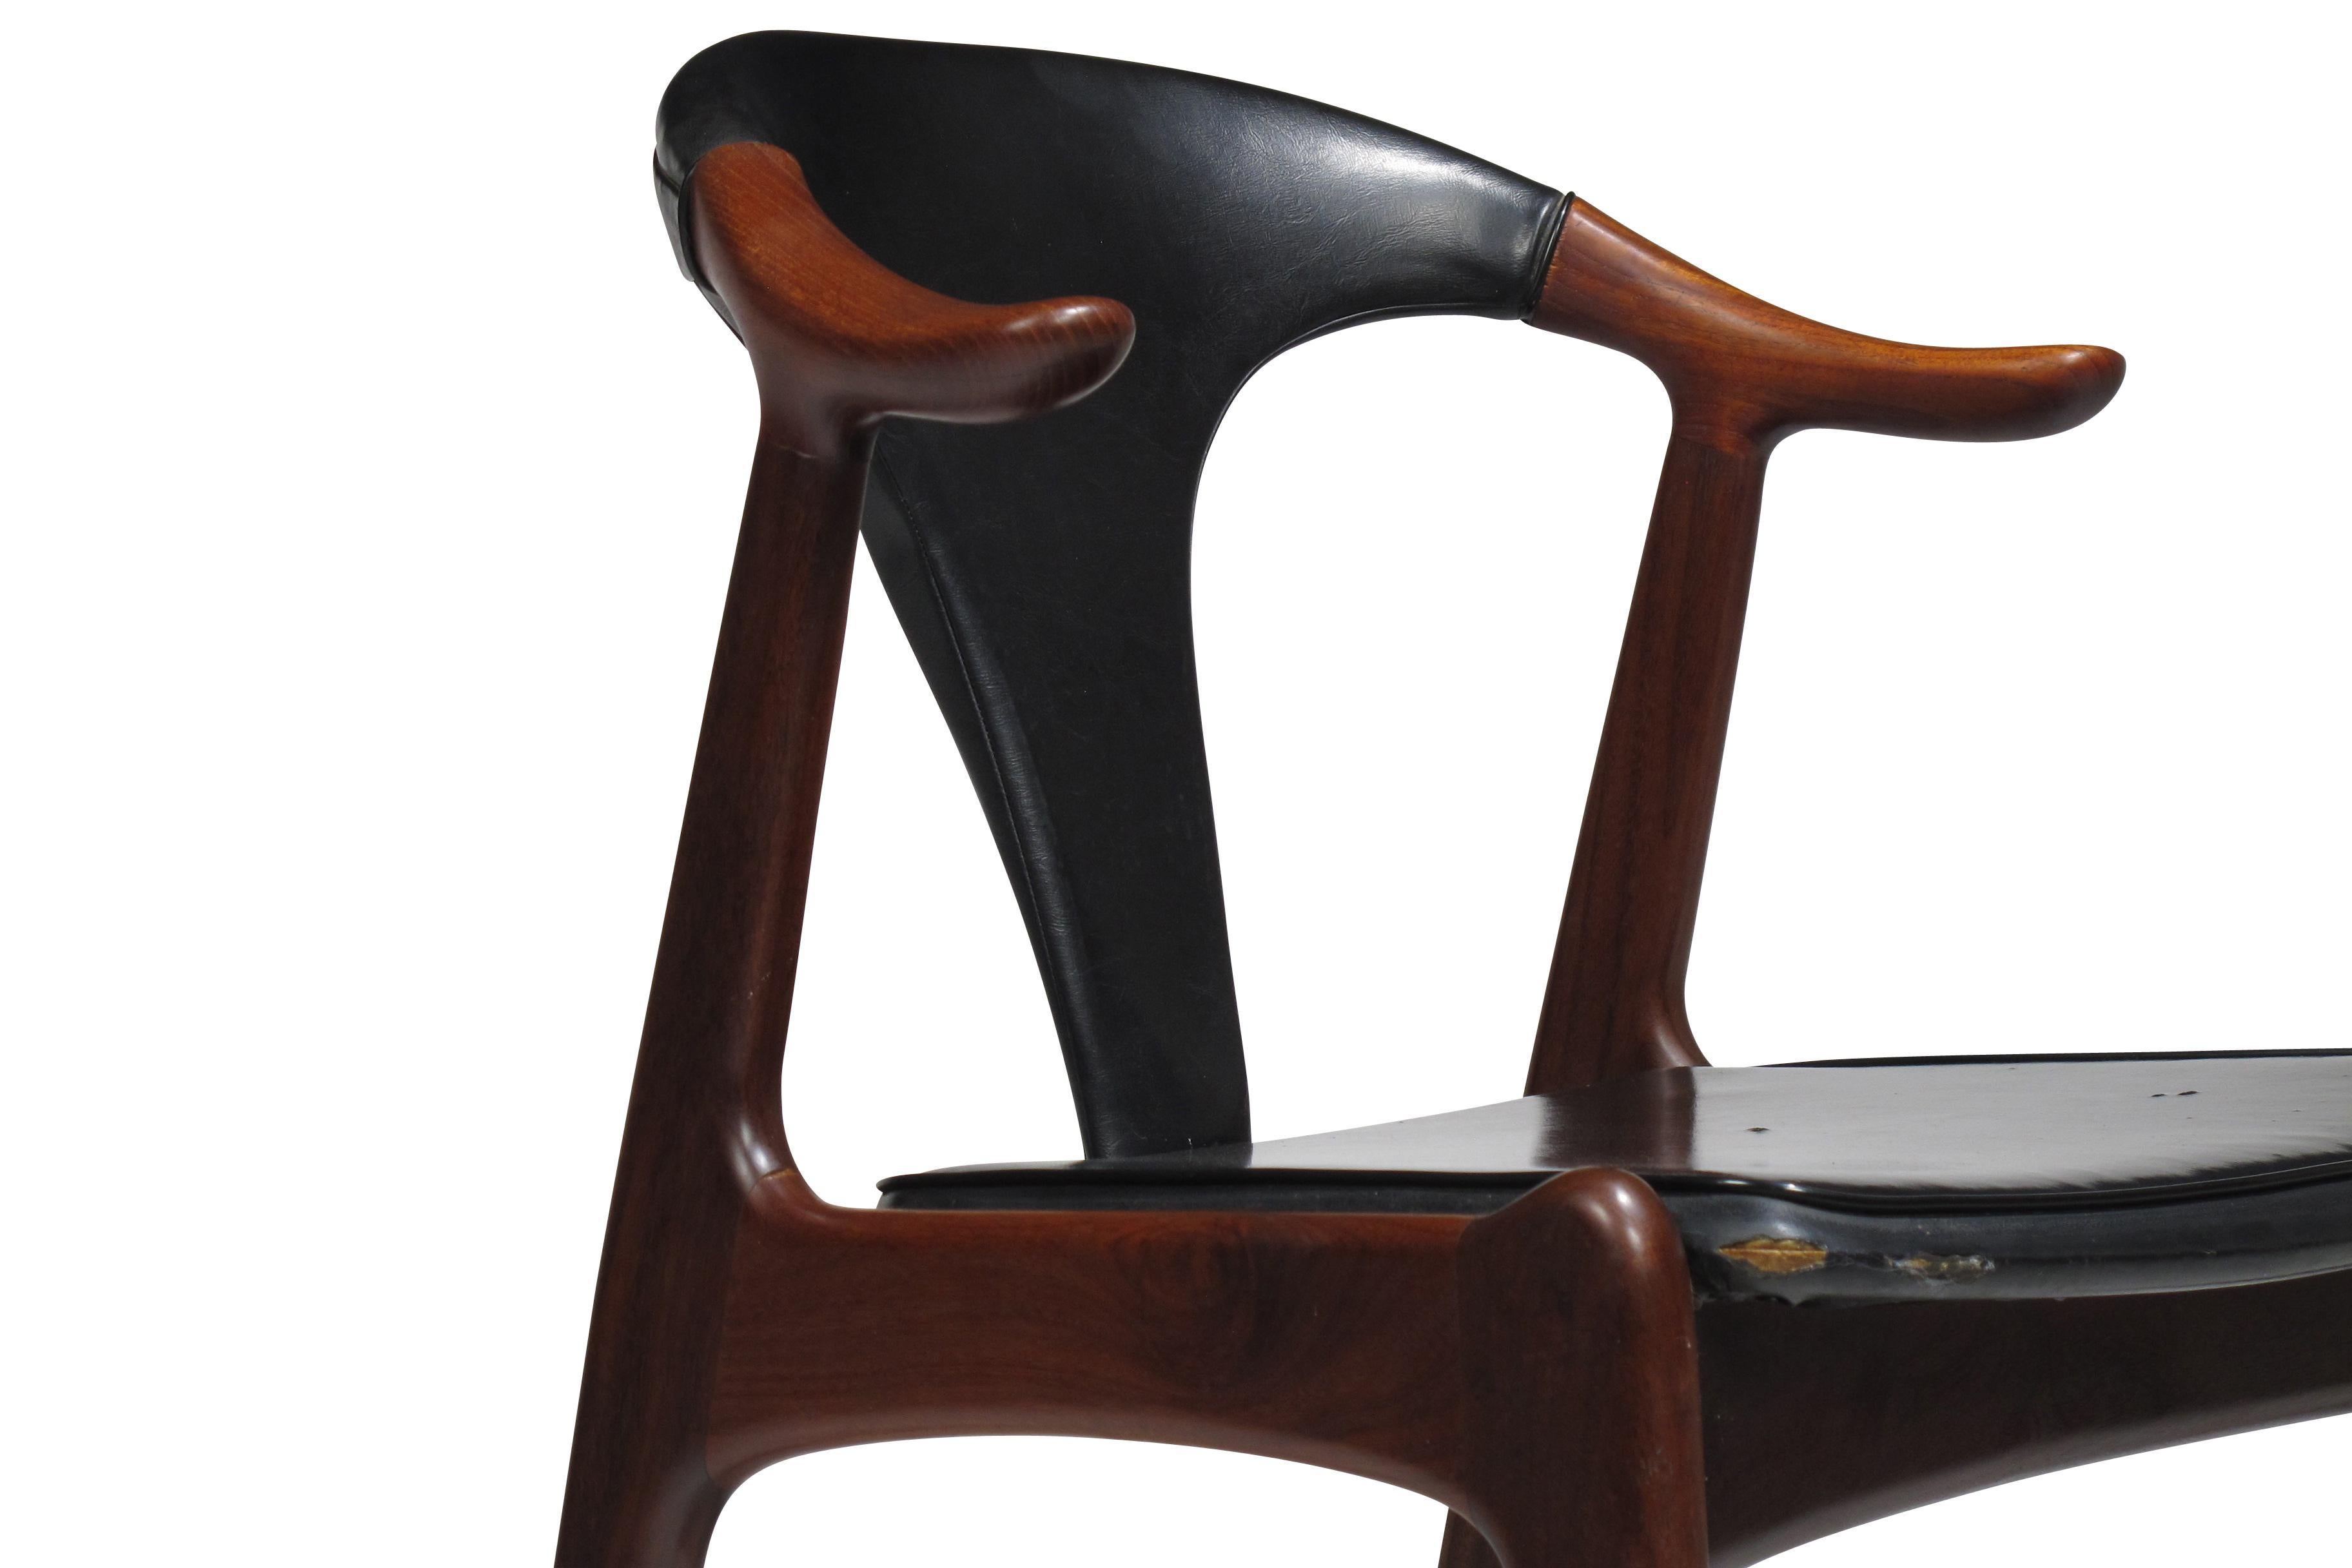 Ox armchair in the manner of Kurt Ostervig. The chair features a solid teak frame, sculpted teak arms, and original black vinyl upholstery. Custom upholstery options are available upon request.